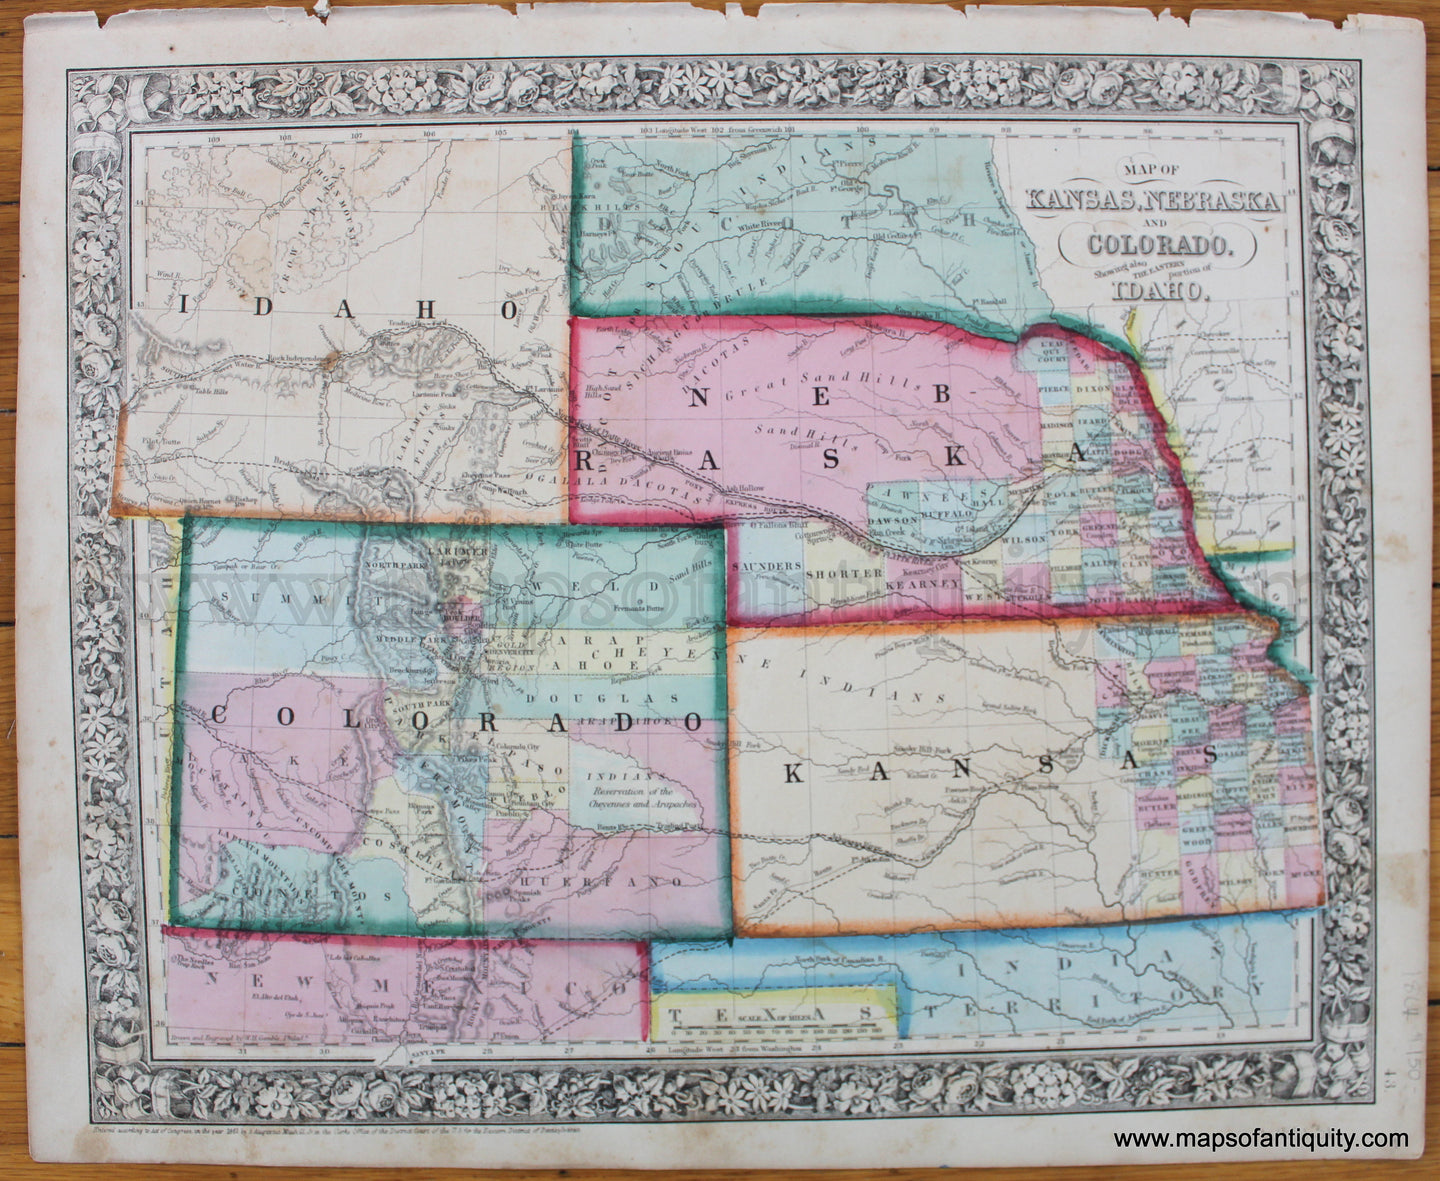 Antique-Hand-Colored-Map-Map-of-Kansas-Nebraska-and-Colorado.-Showing-also-the-Eastern-portion-of-Idaho.-United-States-West-General-1864-Mitchell-Maps-Of-Antiquity